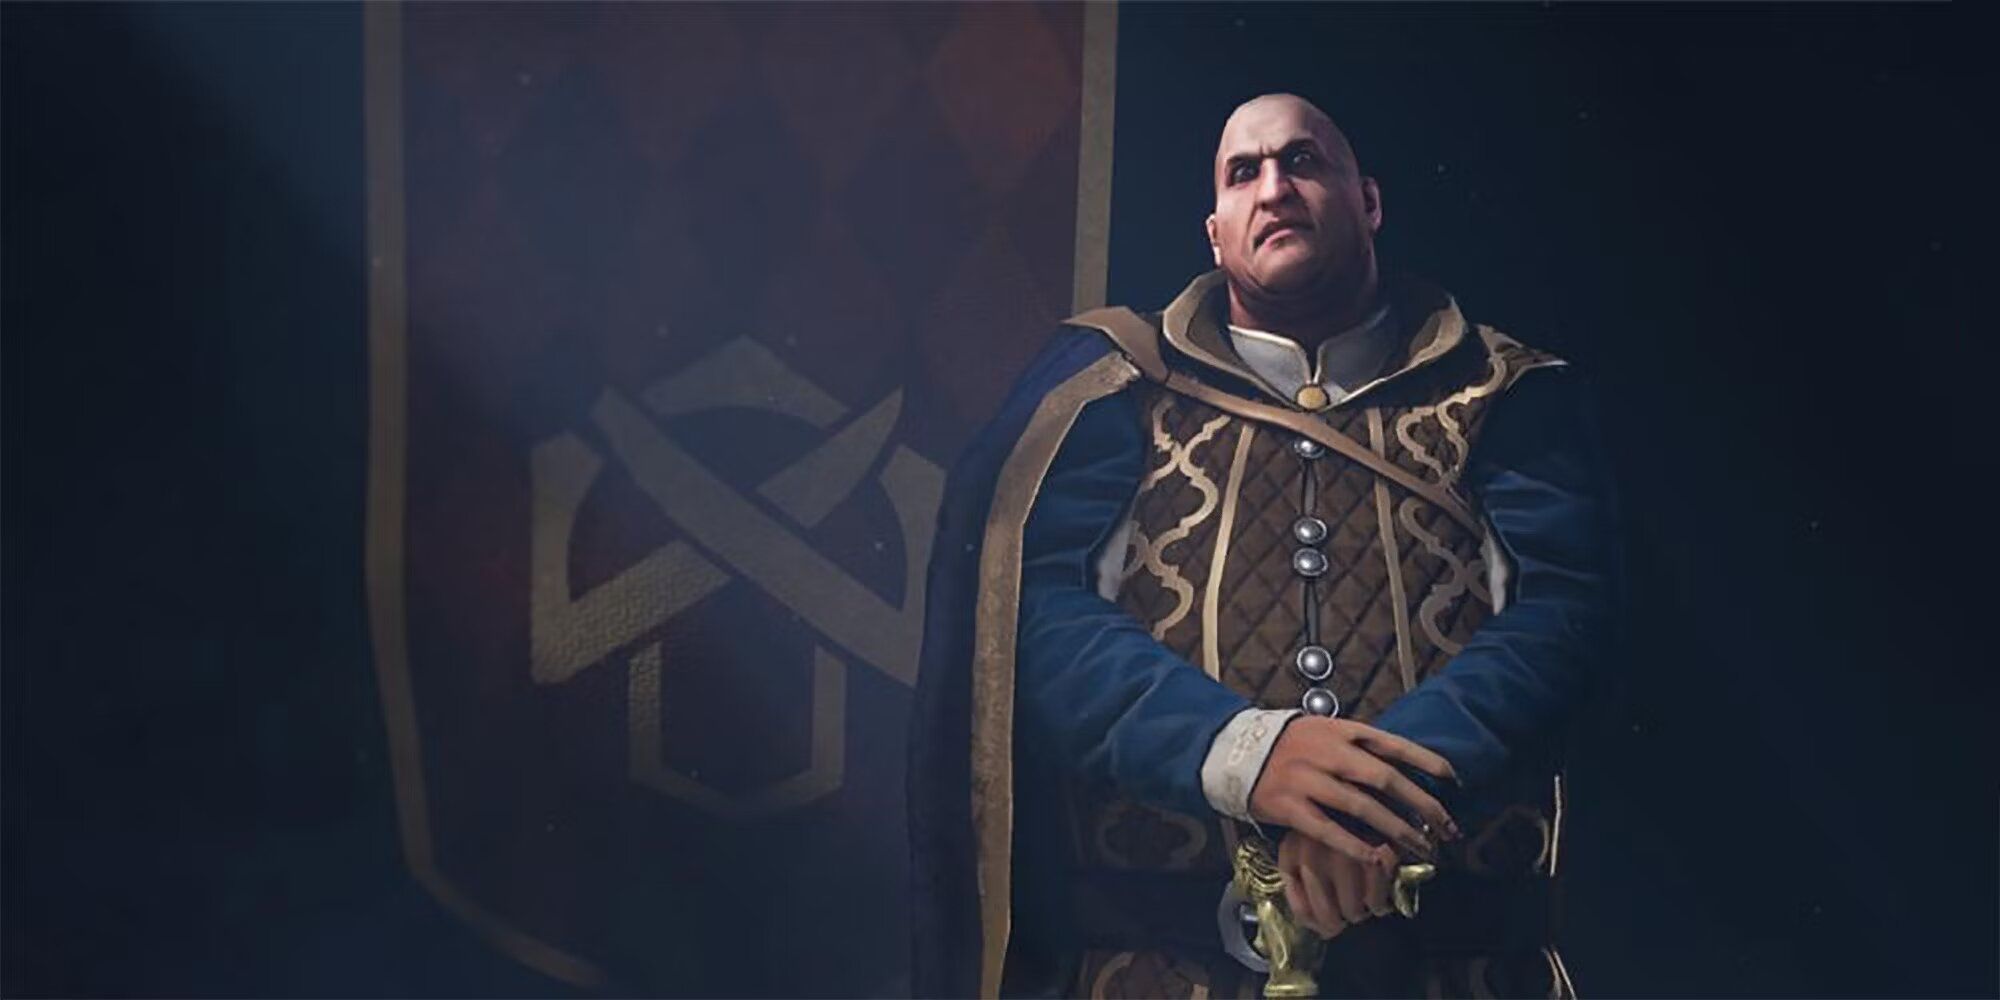 Witcher Gwent Sigismund Djikstra wearing blue and brown robes standing in front of a banner